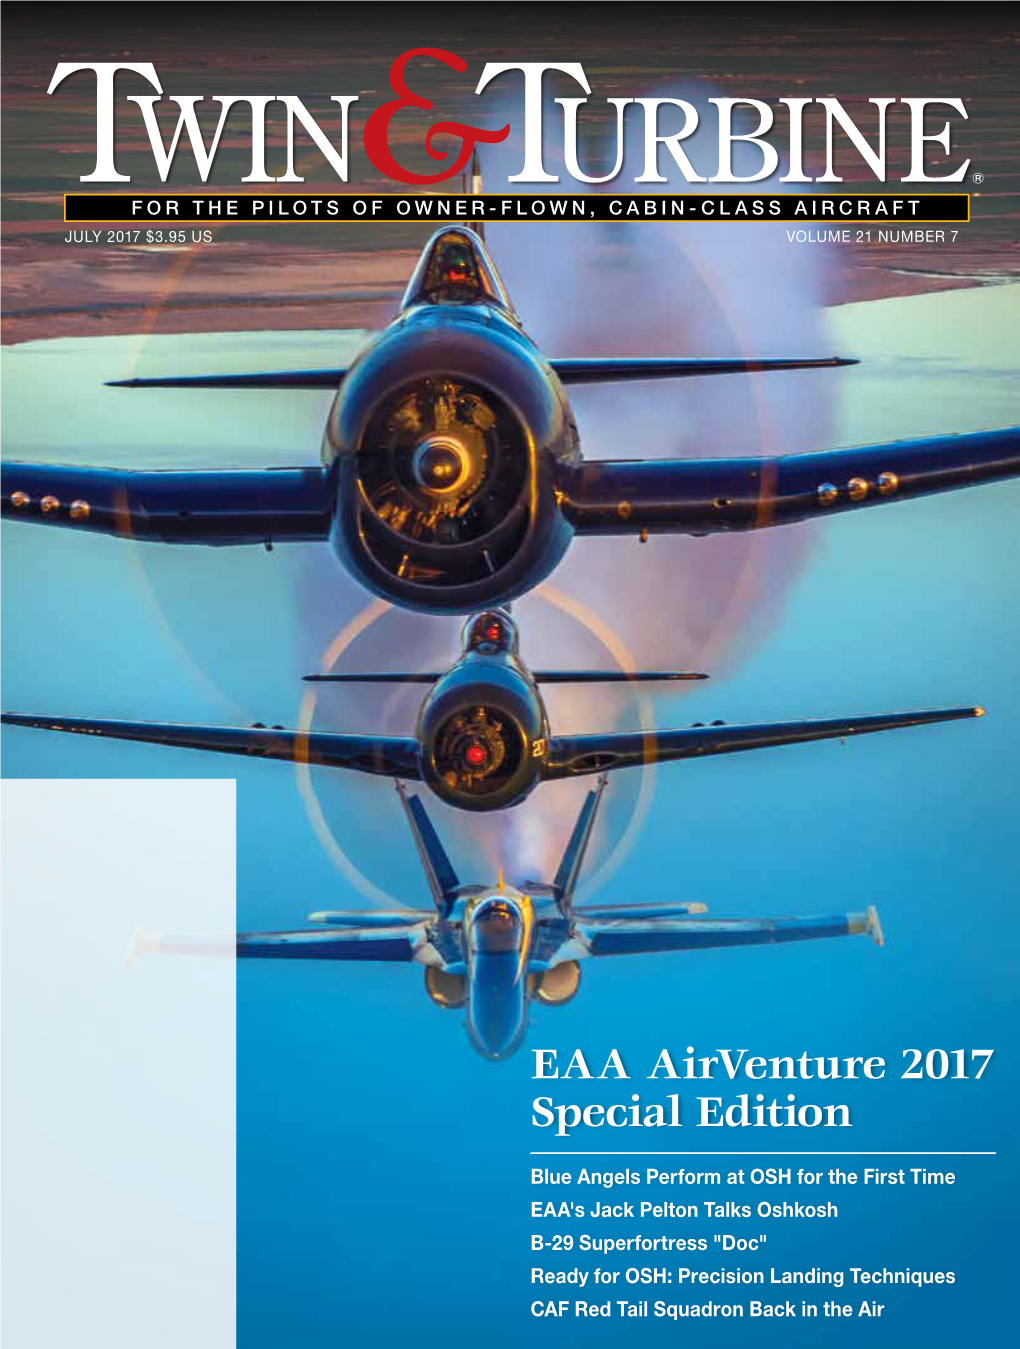 EAA Airventure 2017 Special Edition